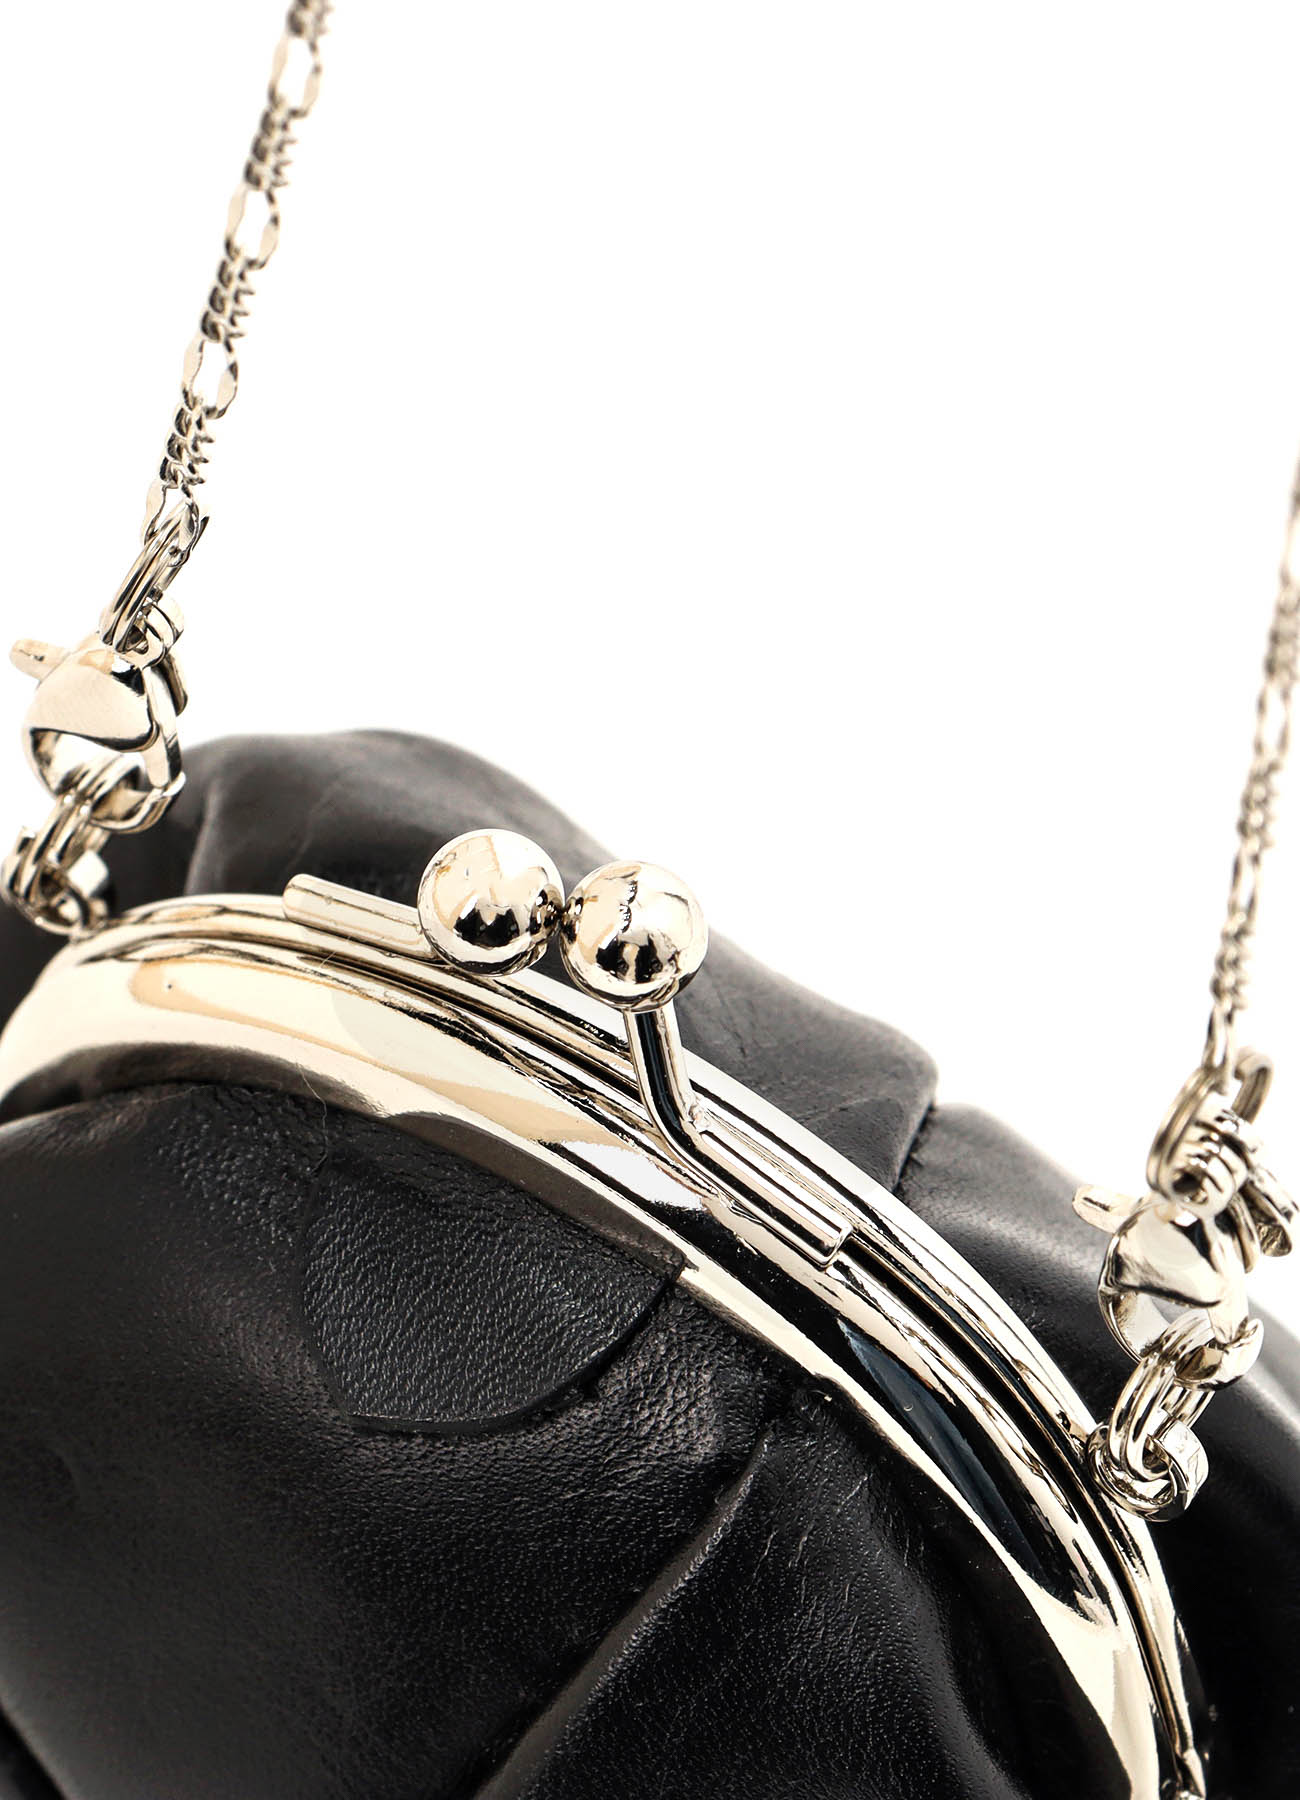 【7/26 12:00 Release】SEMI-GLOSS LEATHER 3D NECKLACE W/ METAL CLASP